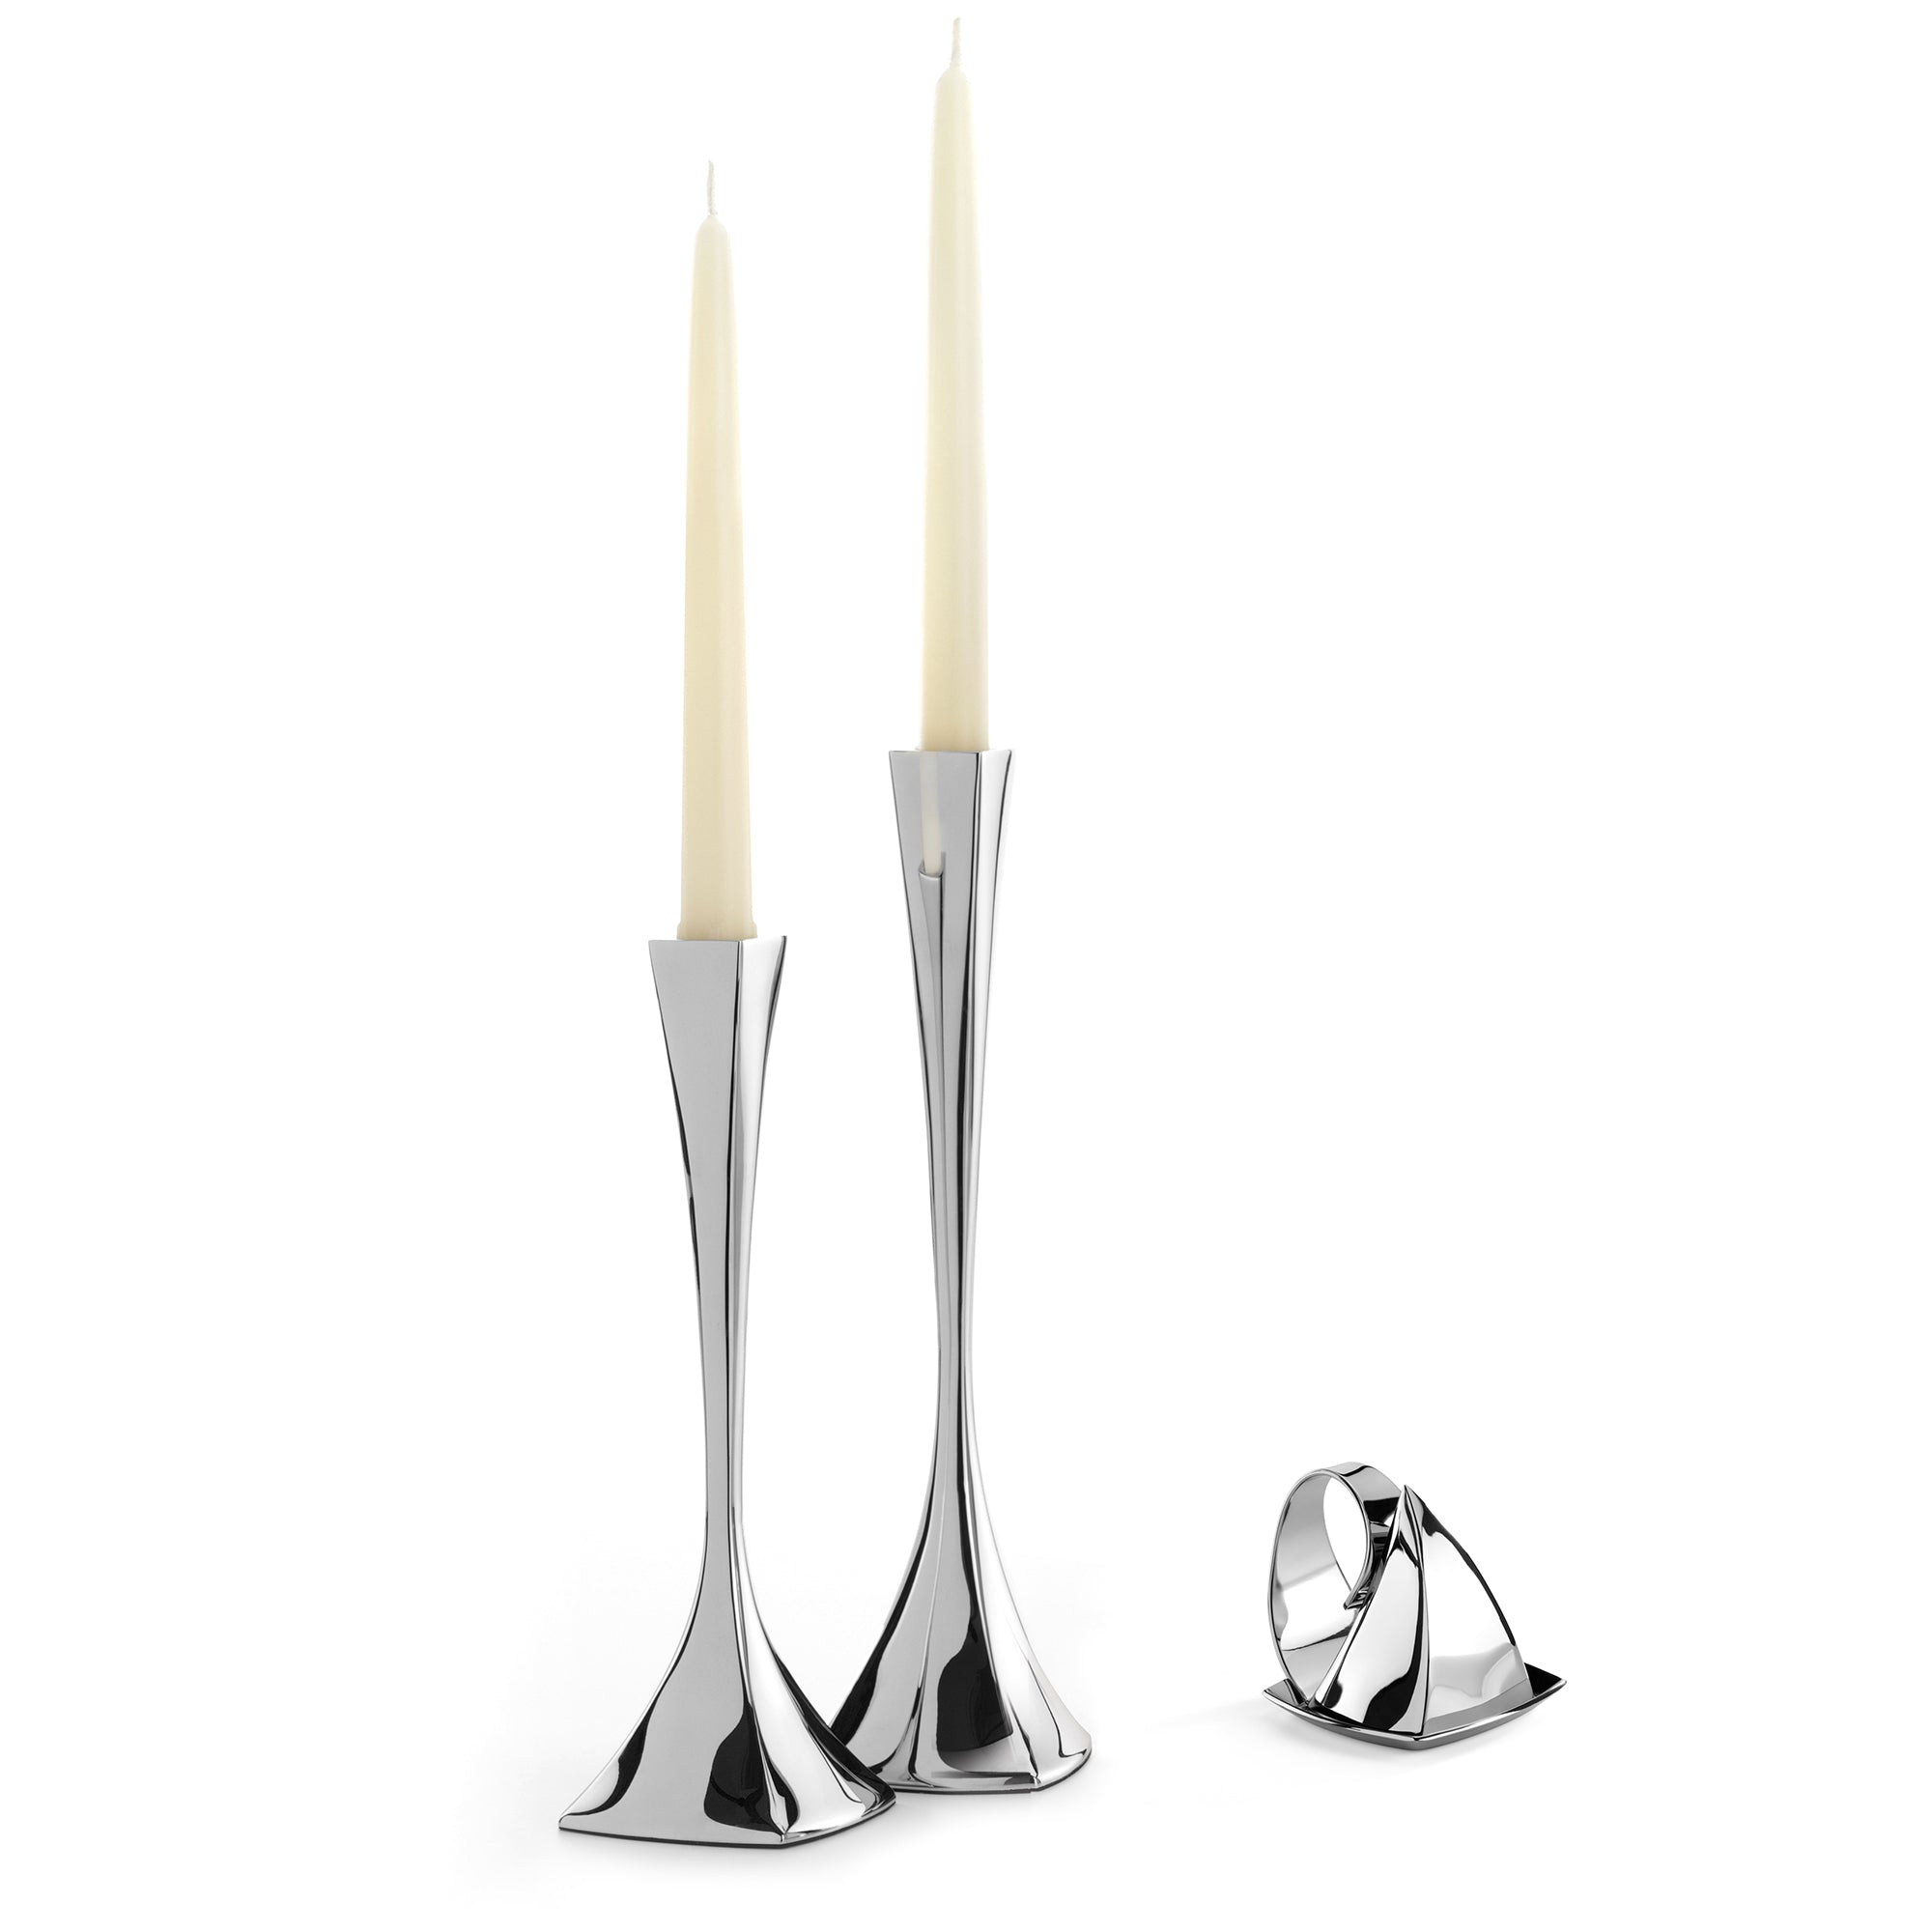 Robert Welch Windrush Stainless Steel Candlestick, Pack of 2